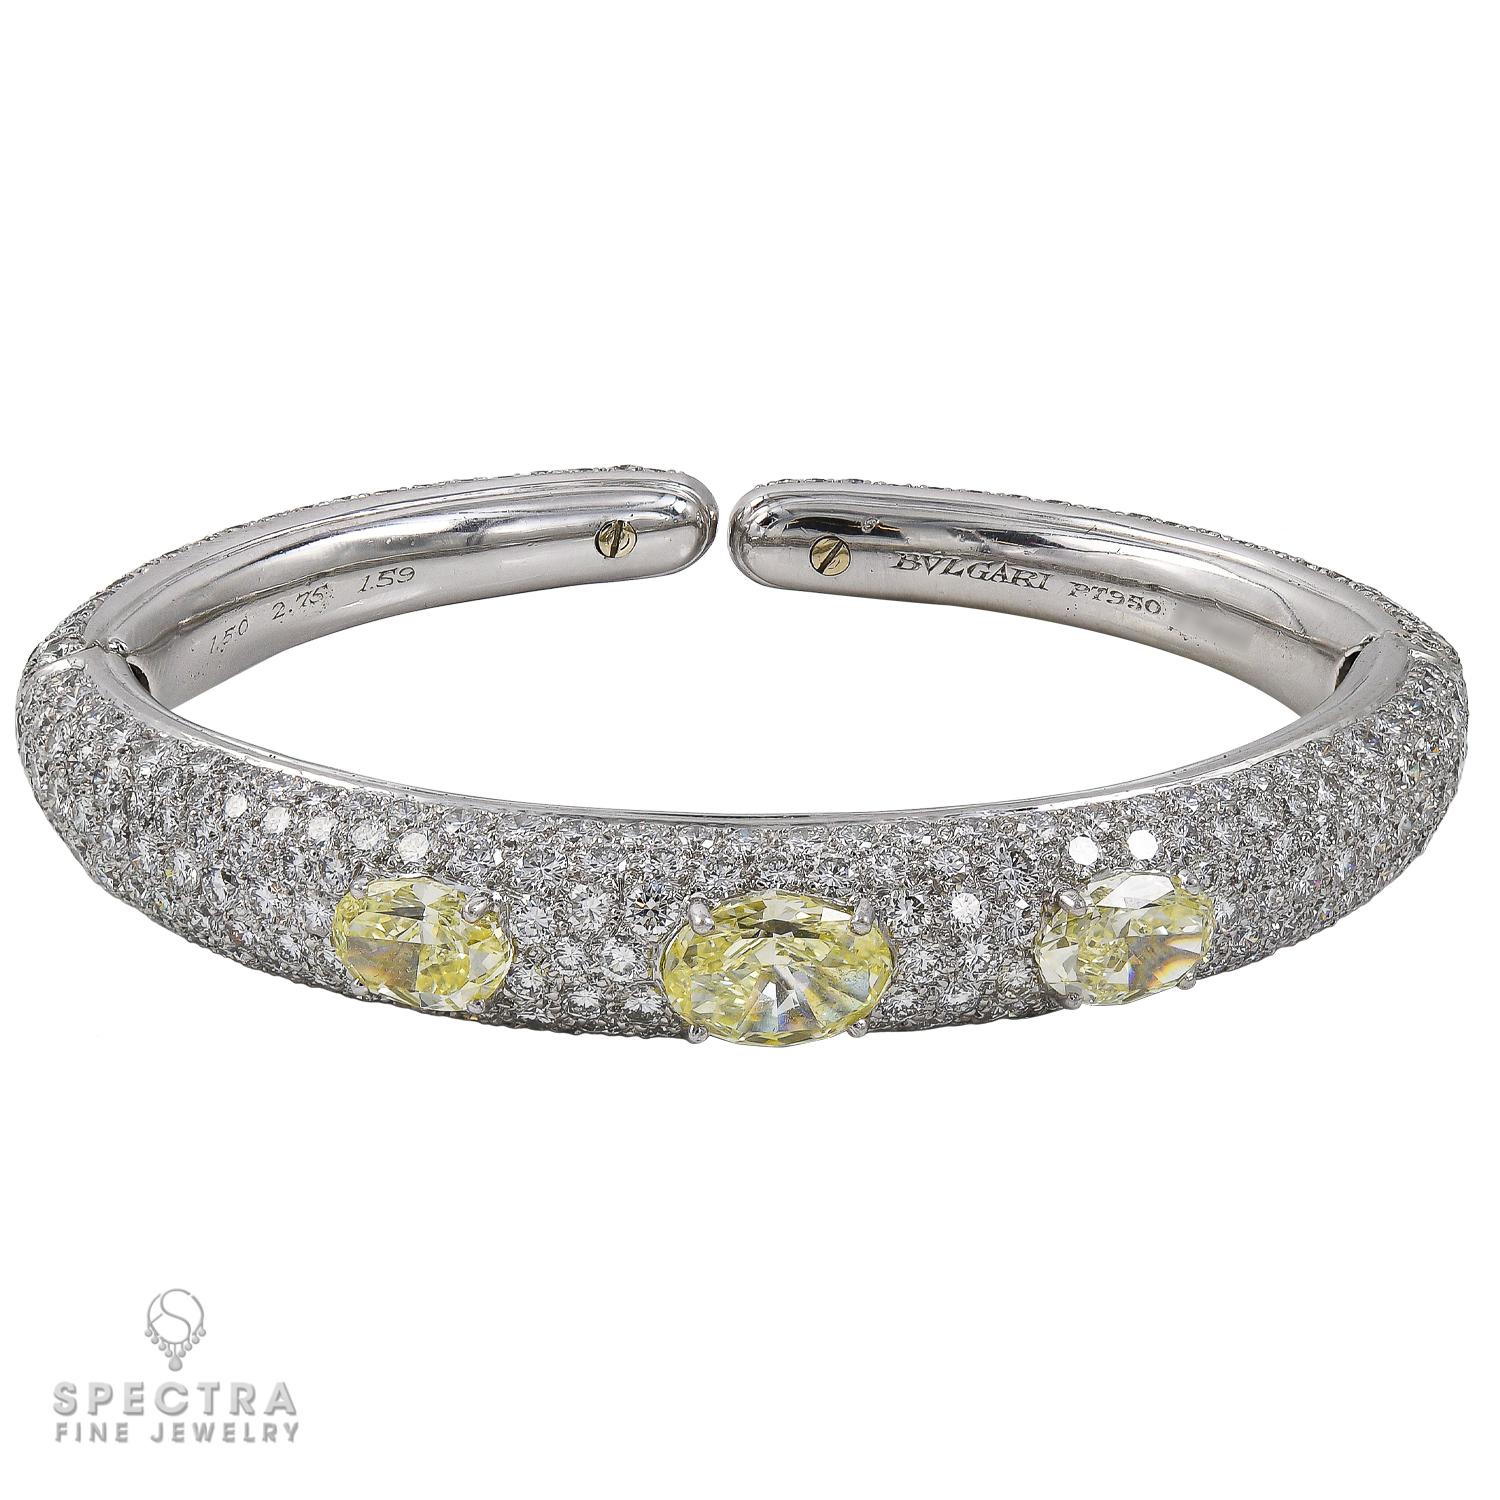 This Bulgari Yellow Diamond Pavé Bangle Bracelet, made in Italy, is a splendid double-hinge bangle in the bombé style. The domed shape is pleasingly rounded, lyrical, and quintessentially feminine. The curved surface enhances the natural beauty of